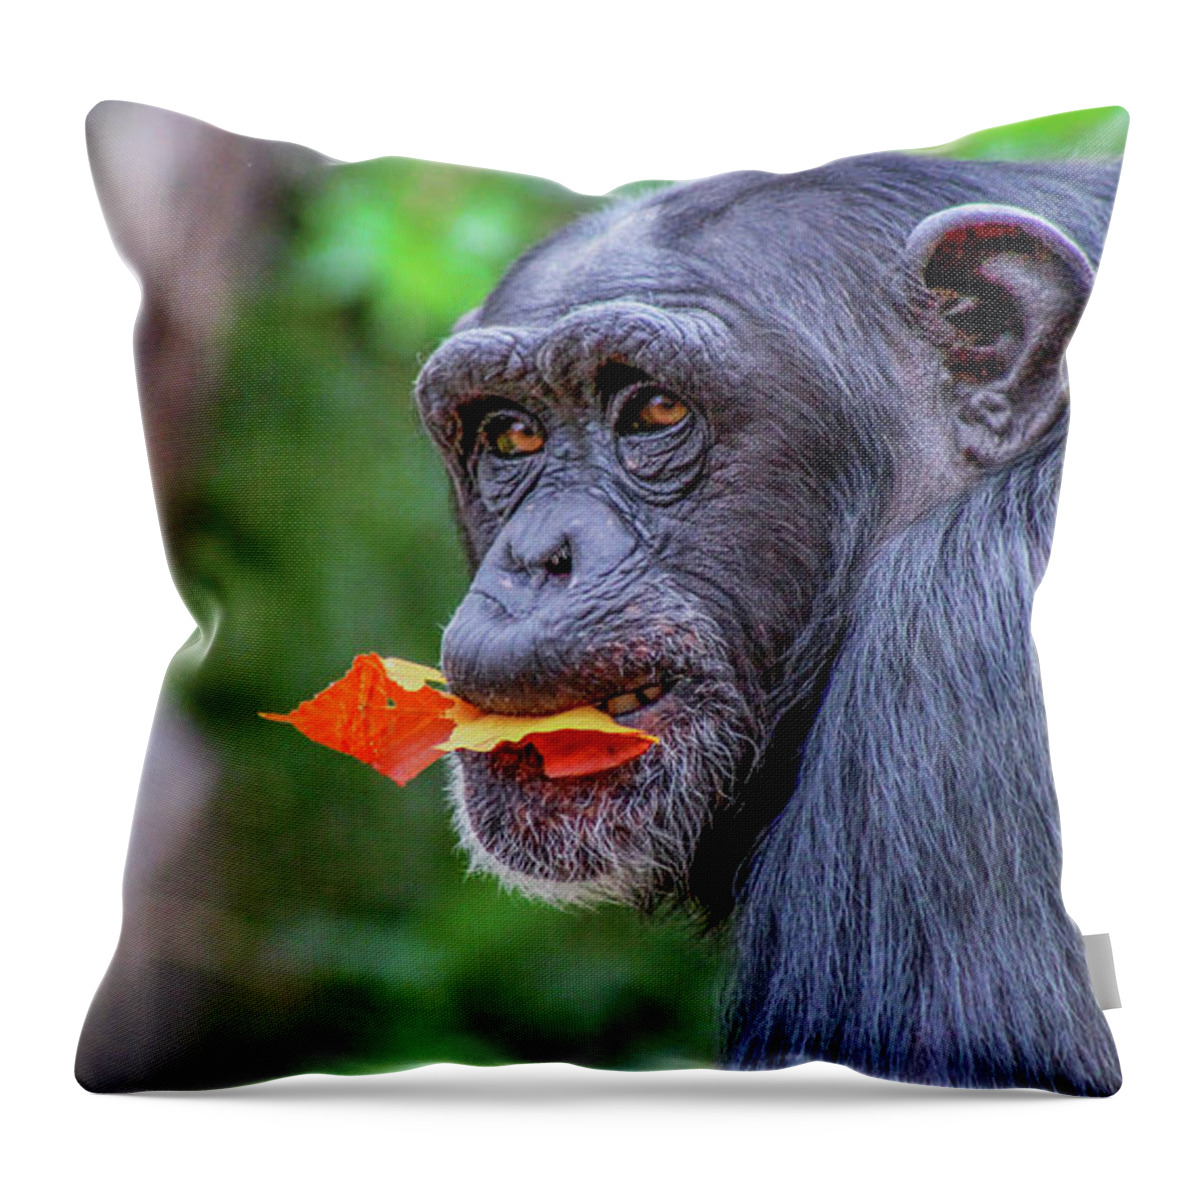 Chimpanzee Throw Pillow featuring the photograph Chimpanzee by Holly Ross